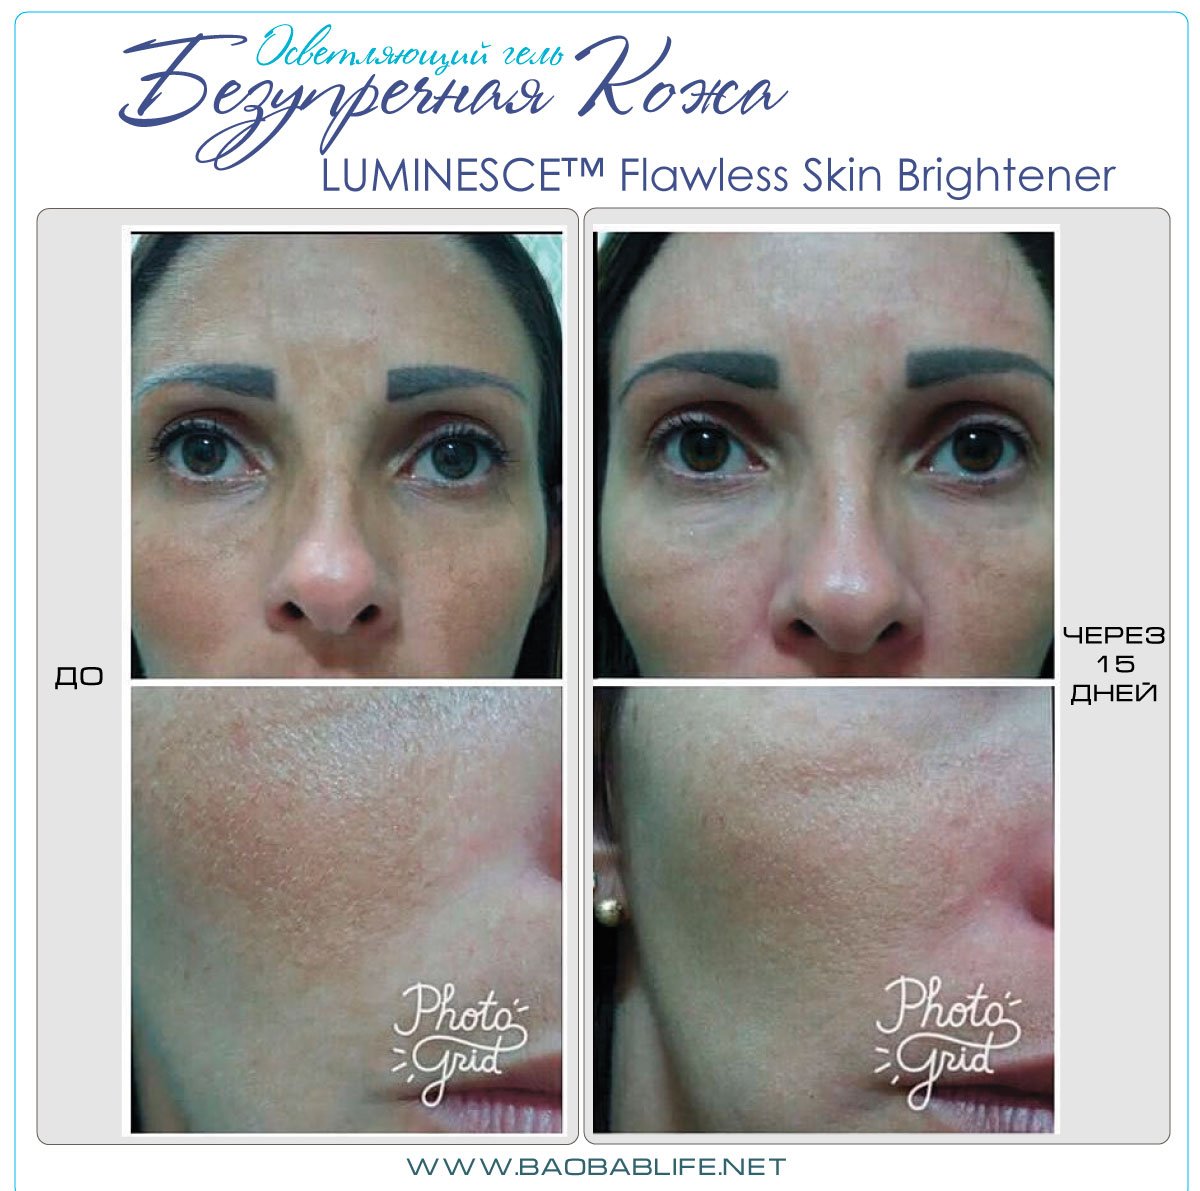 luminesce flawless skin brightener before and after